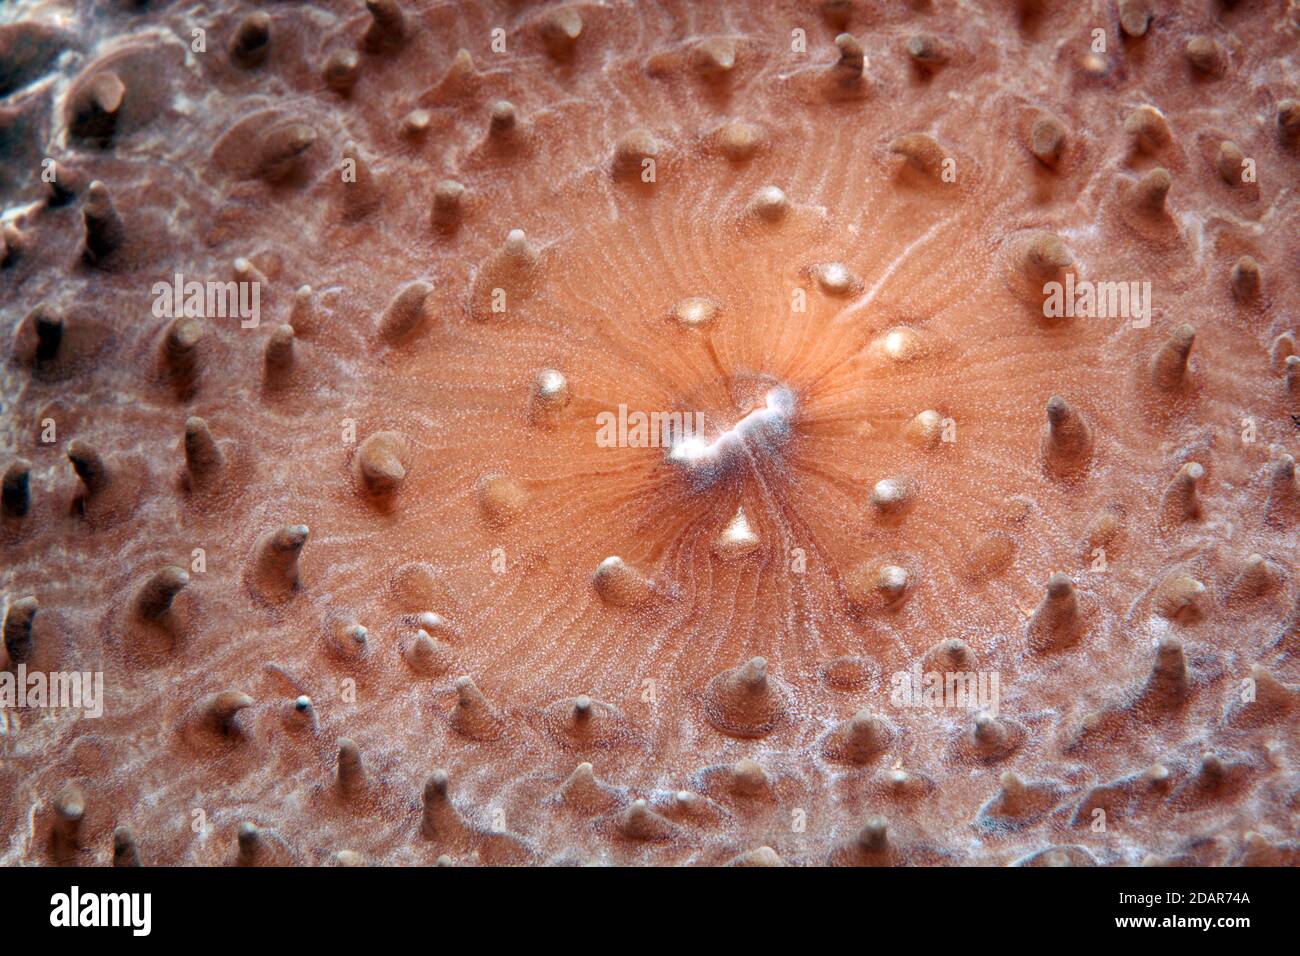 Slice anemone, Giant Cup Mushroom (Amplexidiscus fenestrafer), detail with mouth, Pacific, Great Barrier Reef, UNESCO World Heritage, Australia Stock Photo